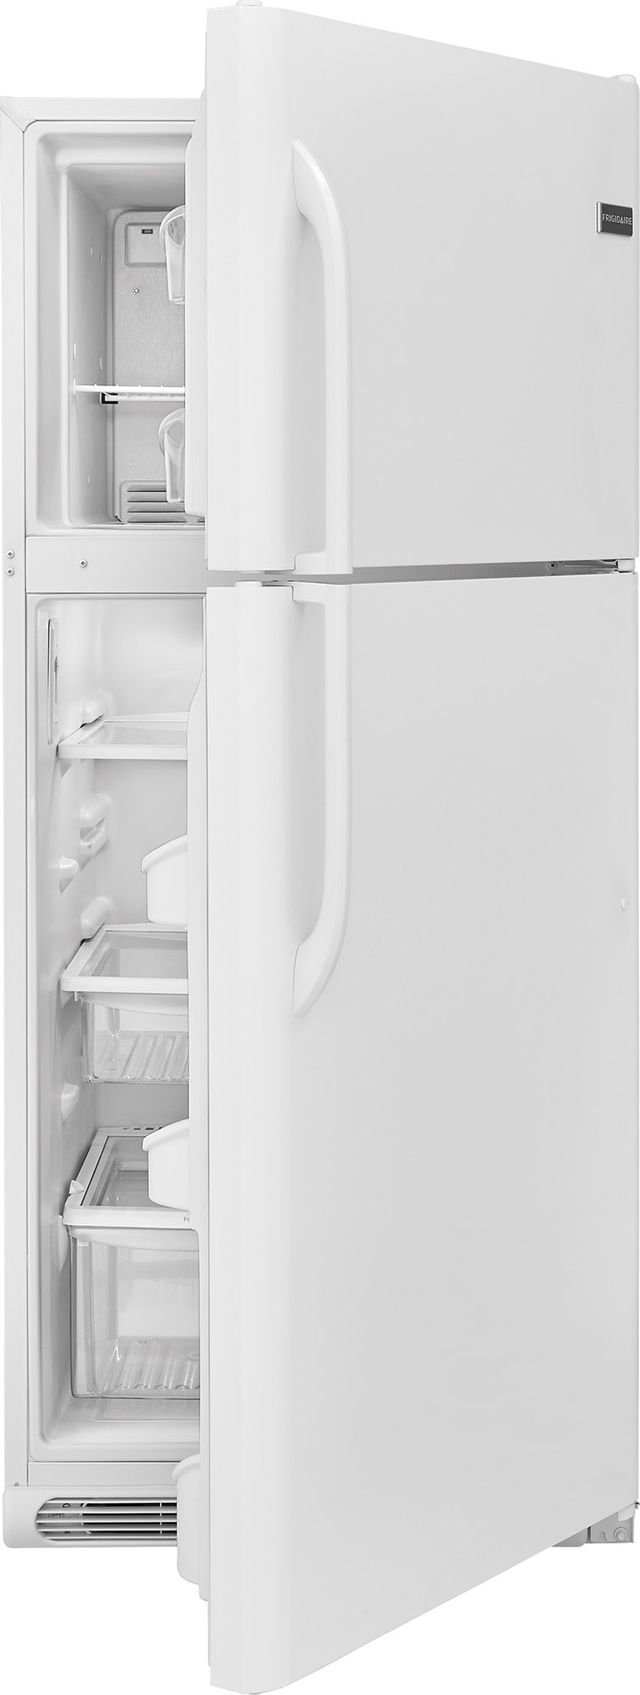 Frigidaire Gallery® 20.5 Cu. Ft. Top Mount Refrigerator-Pearl White 4